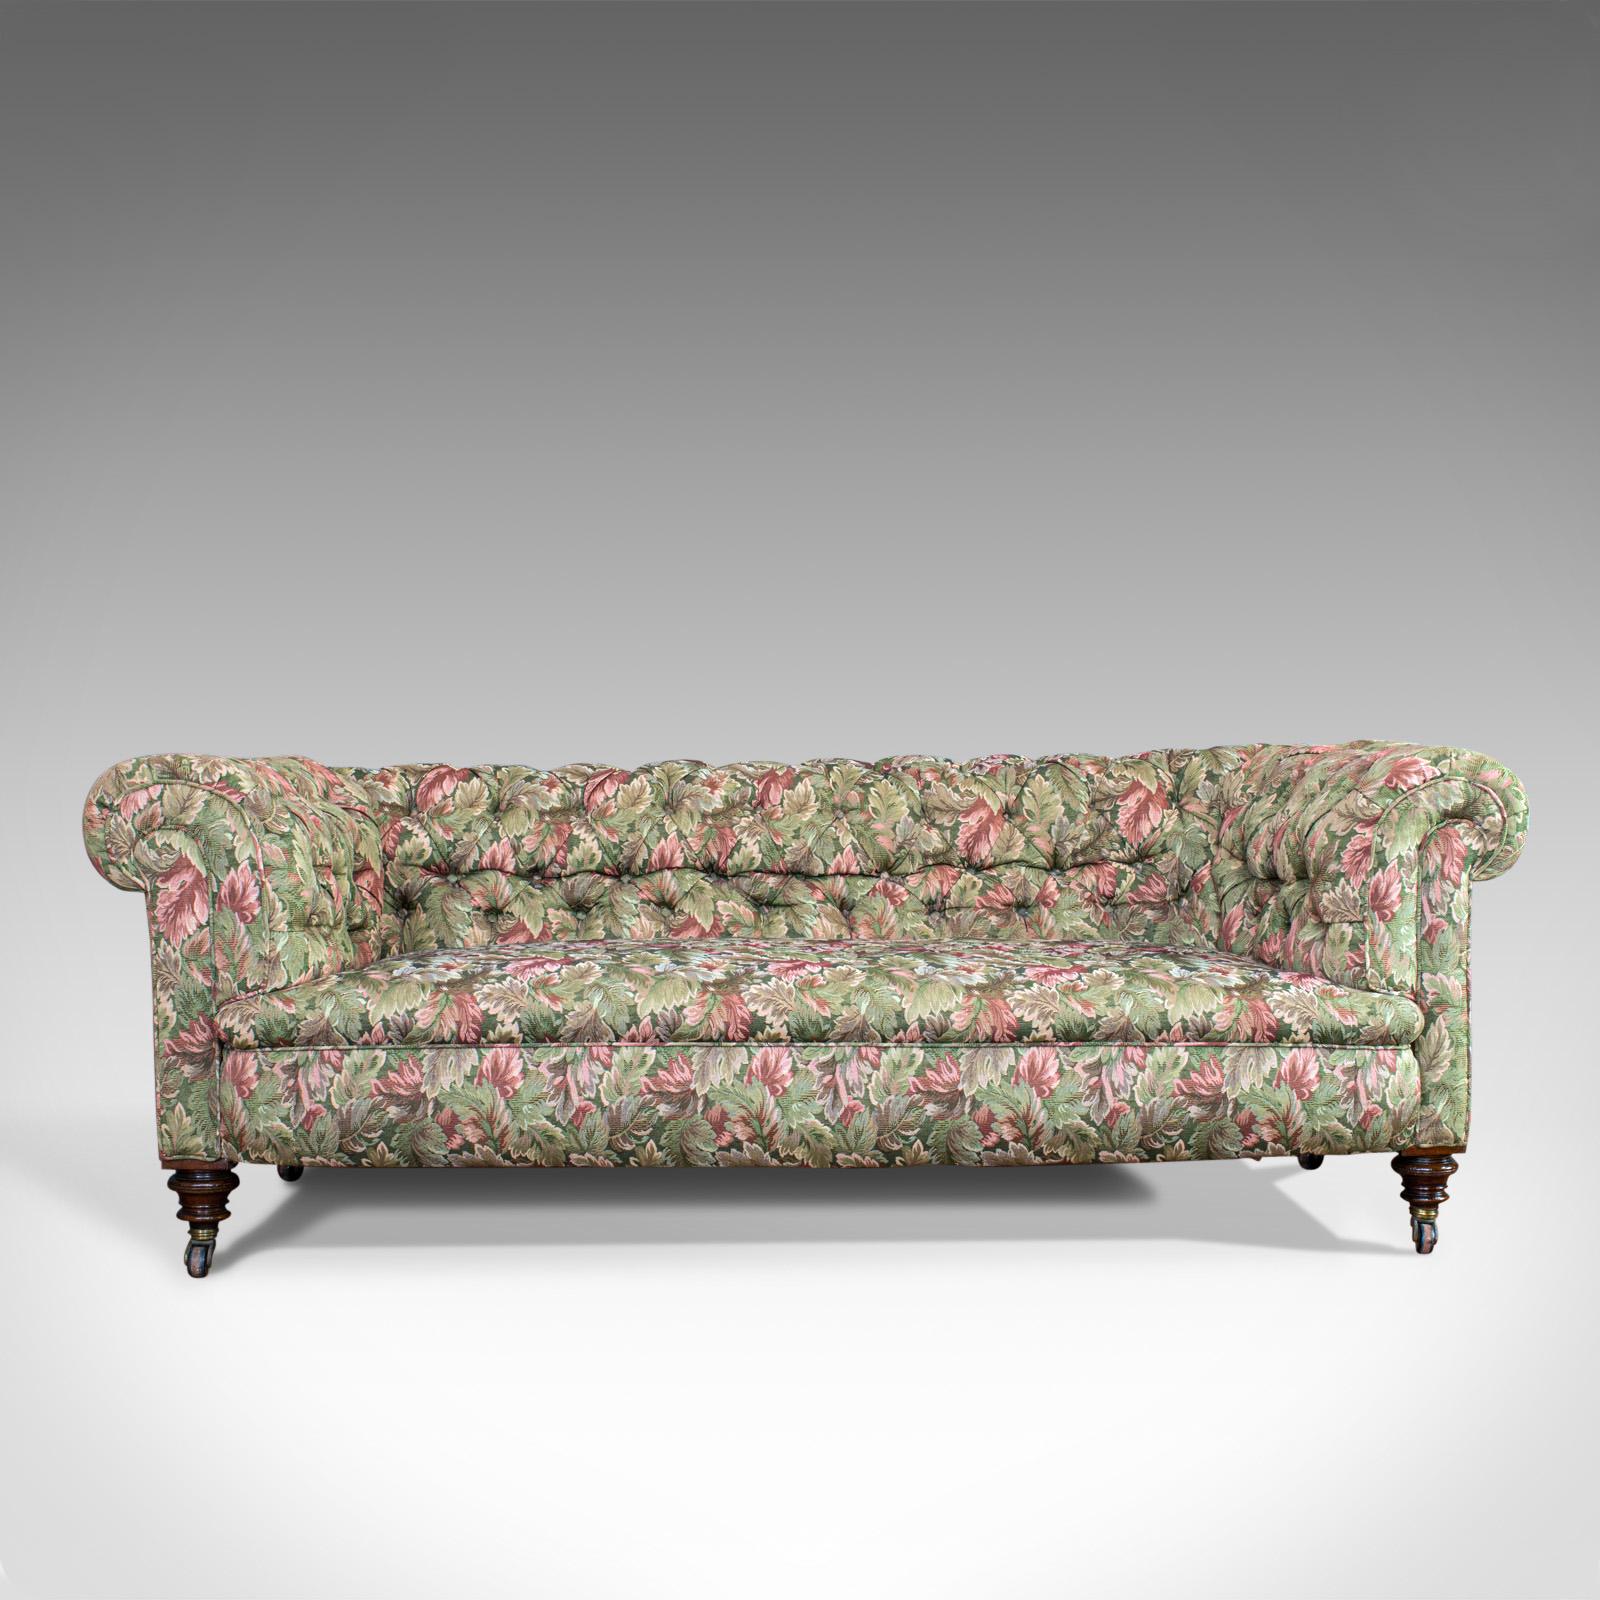 This is an antique Chesterfield sofa. An English, textile and mahogany upholstered couch with seating for 2-3 people and dating to the late 19th century, circa 1880.

Professionally upholstered with consistent colour and good order